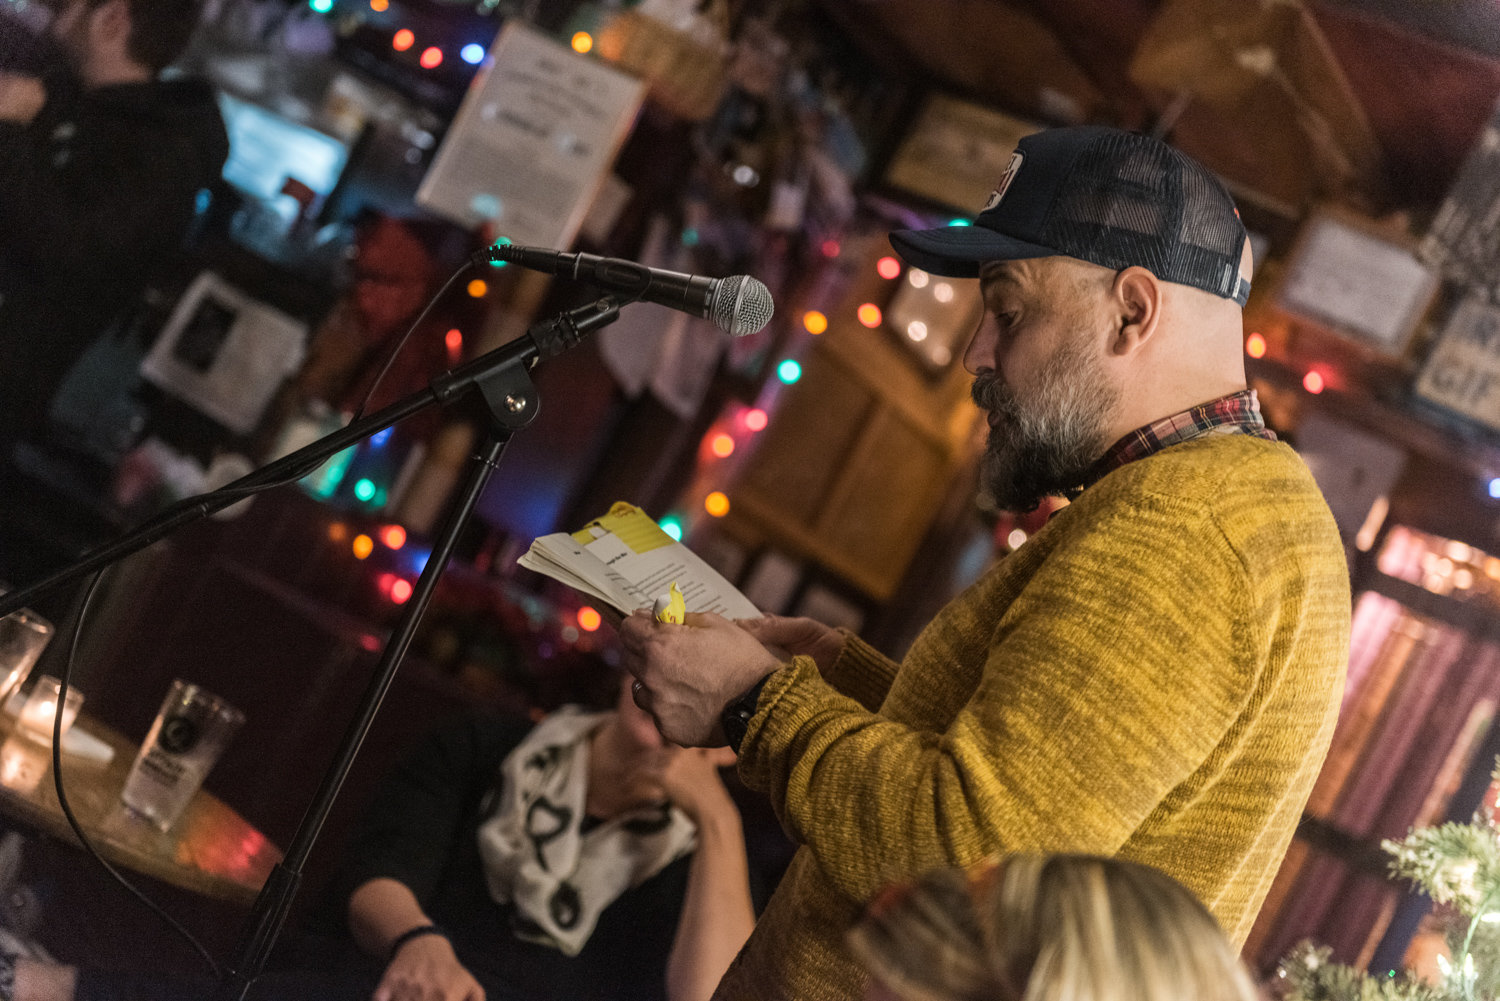 Timothy Donnelly reads a poem from his recently published book ‘The Problem of the Many’ at the 10-year anniversary of the Poor Mouth Writer’s Night at An Beal Bocht Cafe on Dec. 11.